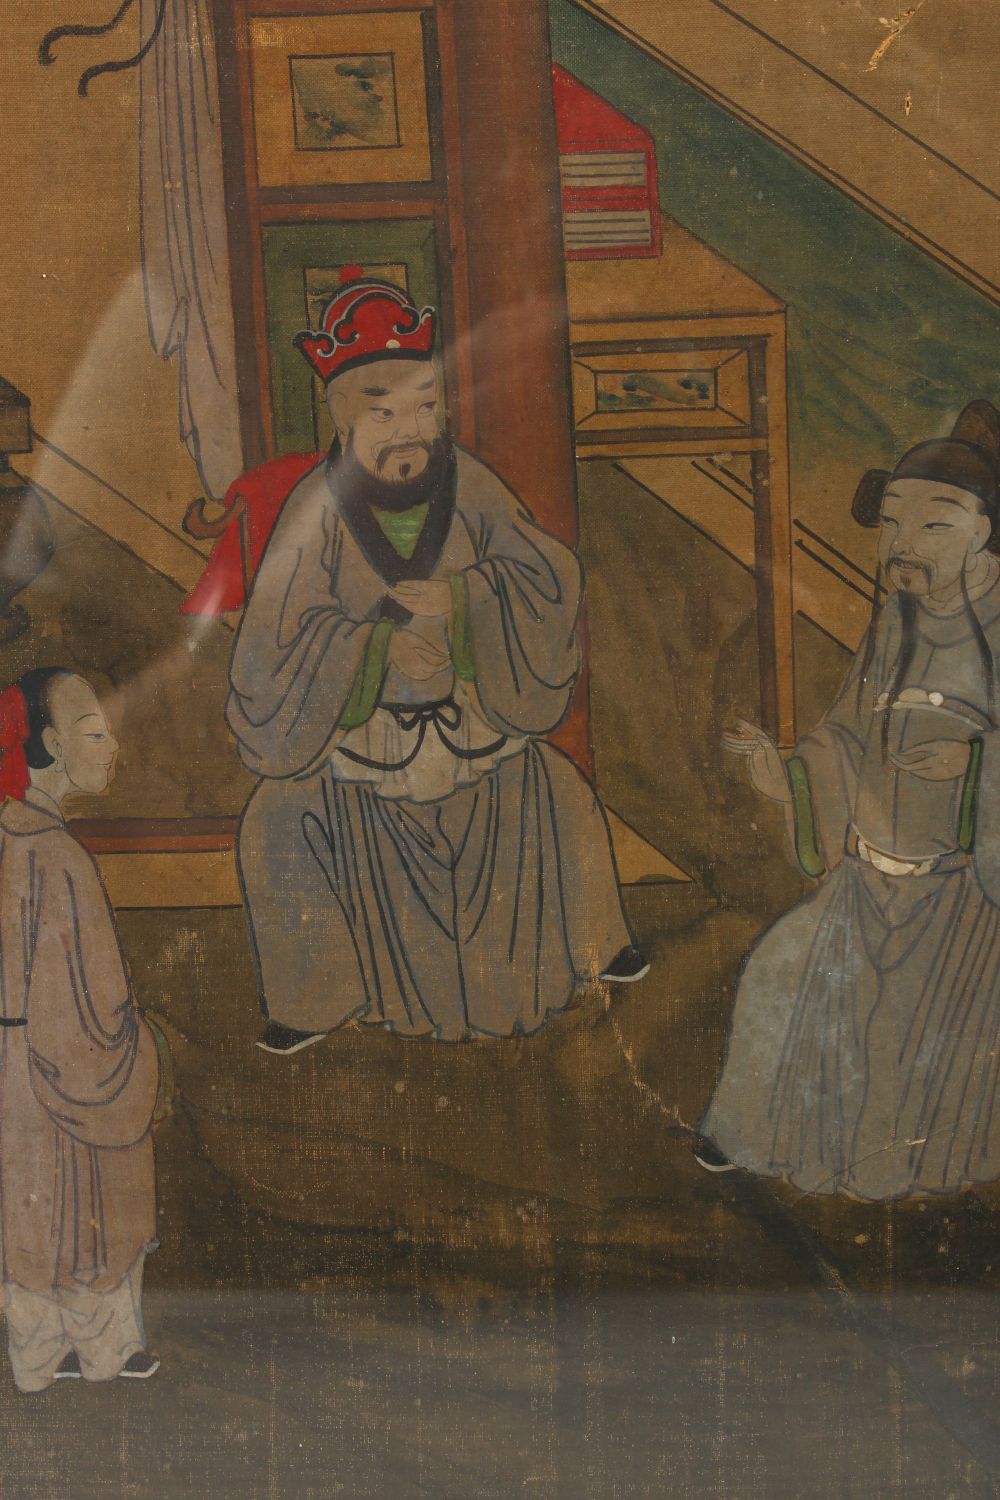 A PAIR OF POSSIBLY 18TH CENTURY CHINESE PAINTINGS ON SILK, framed depicting scenes of interior - Image 4 of 5